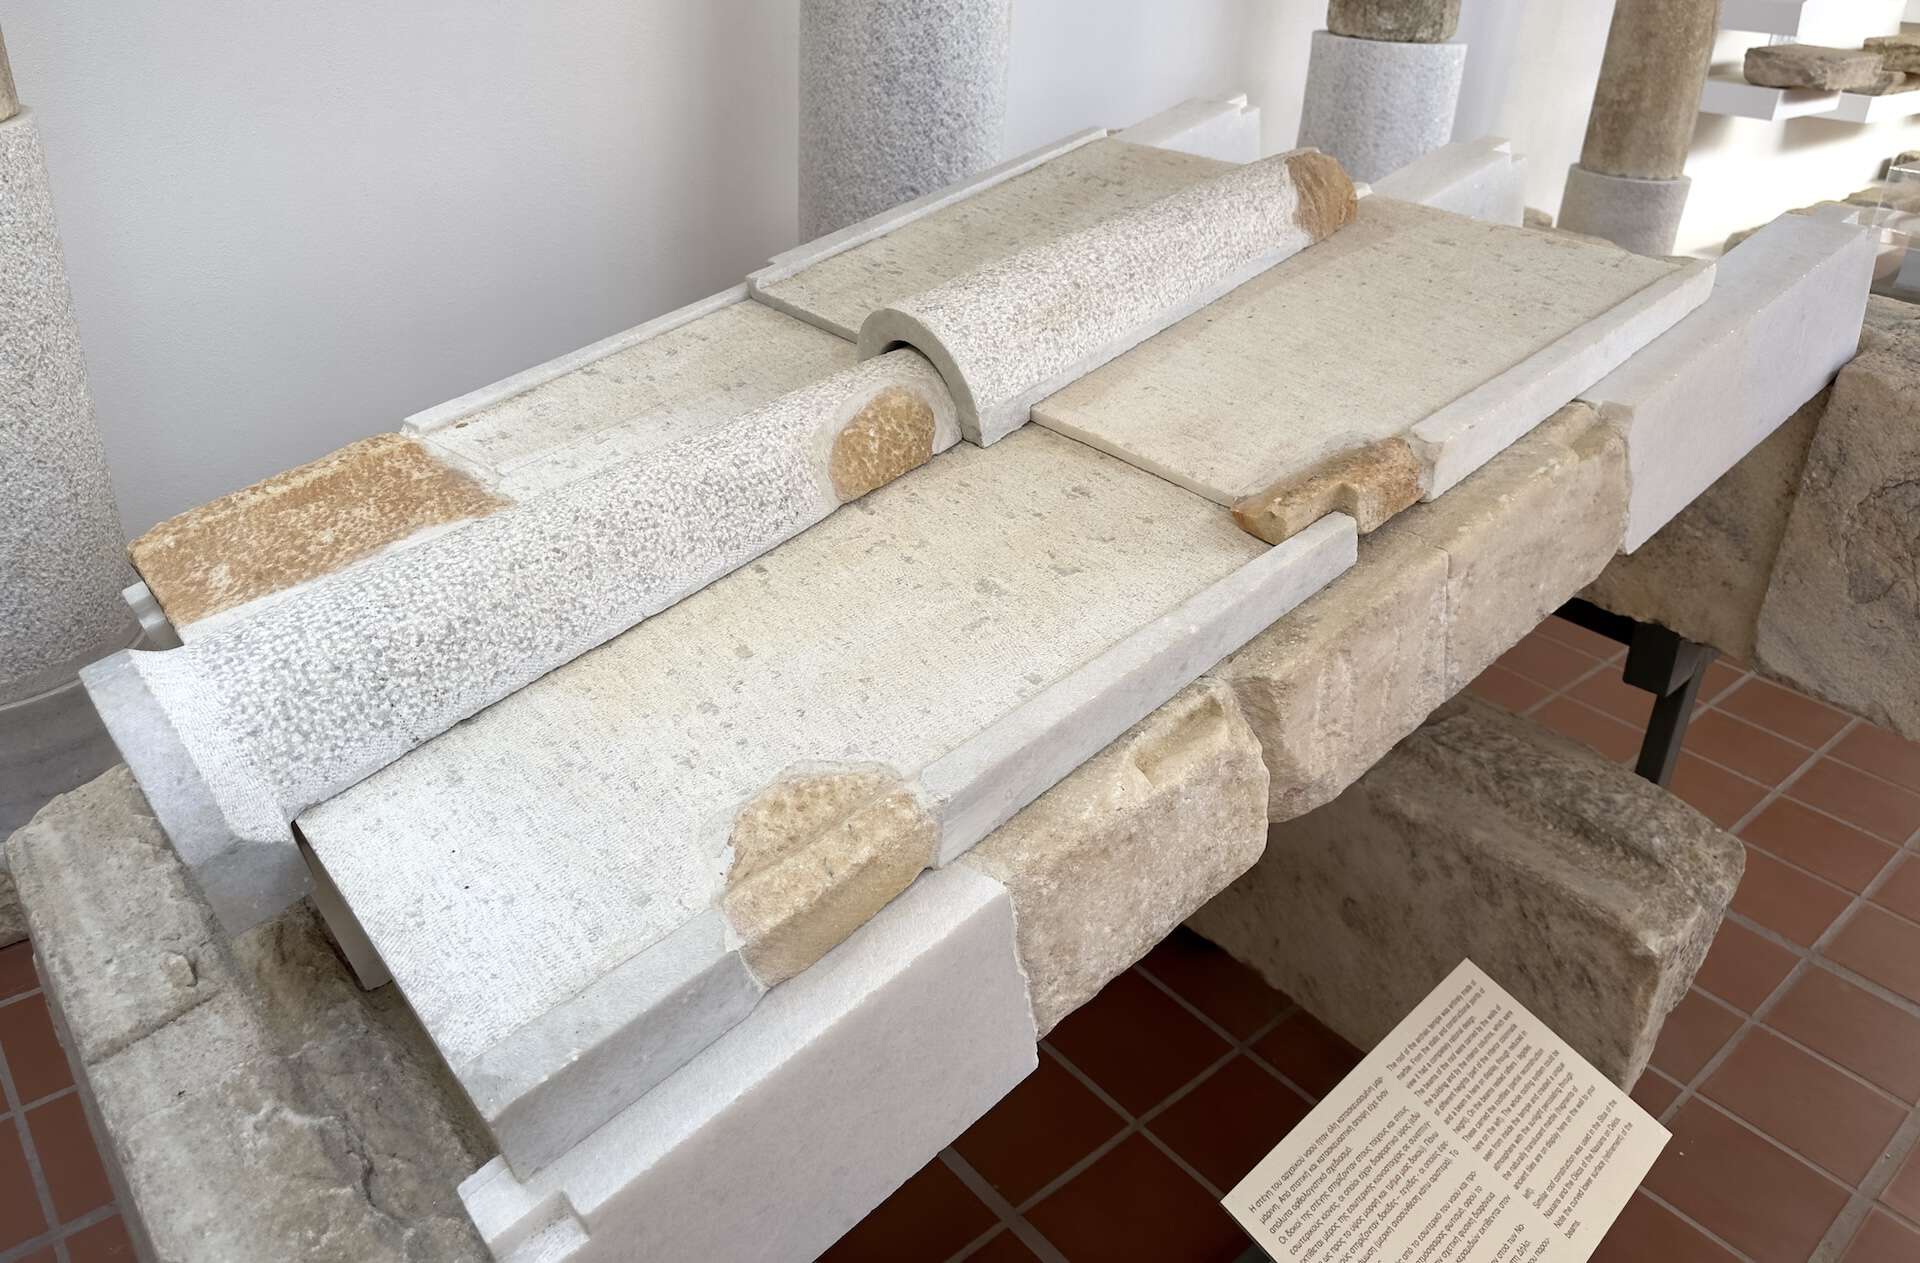 Marble roof tiles and beams in the museum at the Temple of Demeter in Naxos, Greece